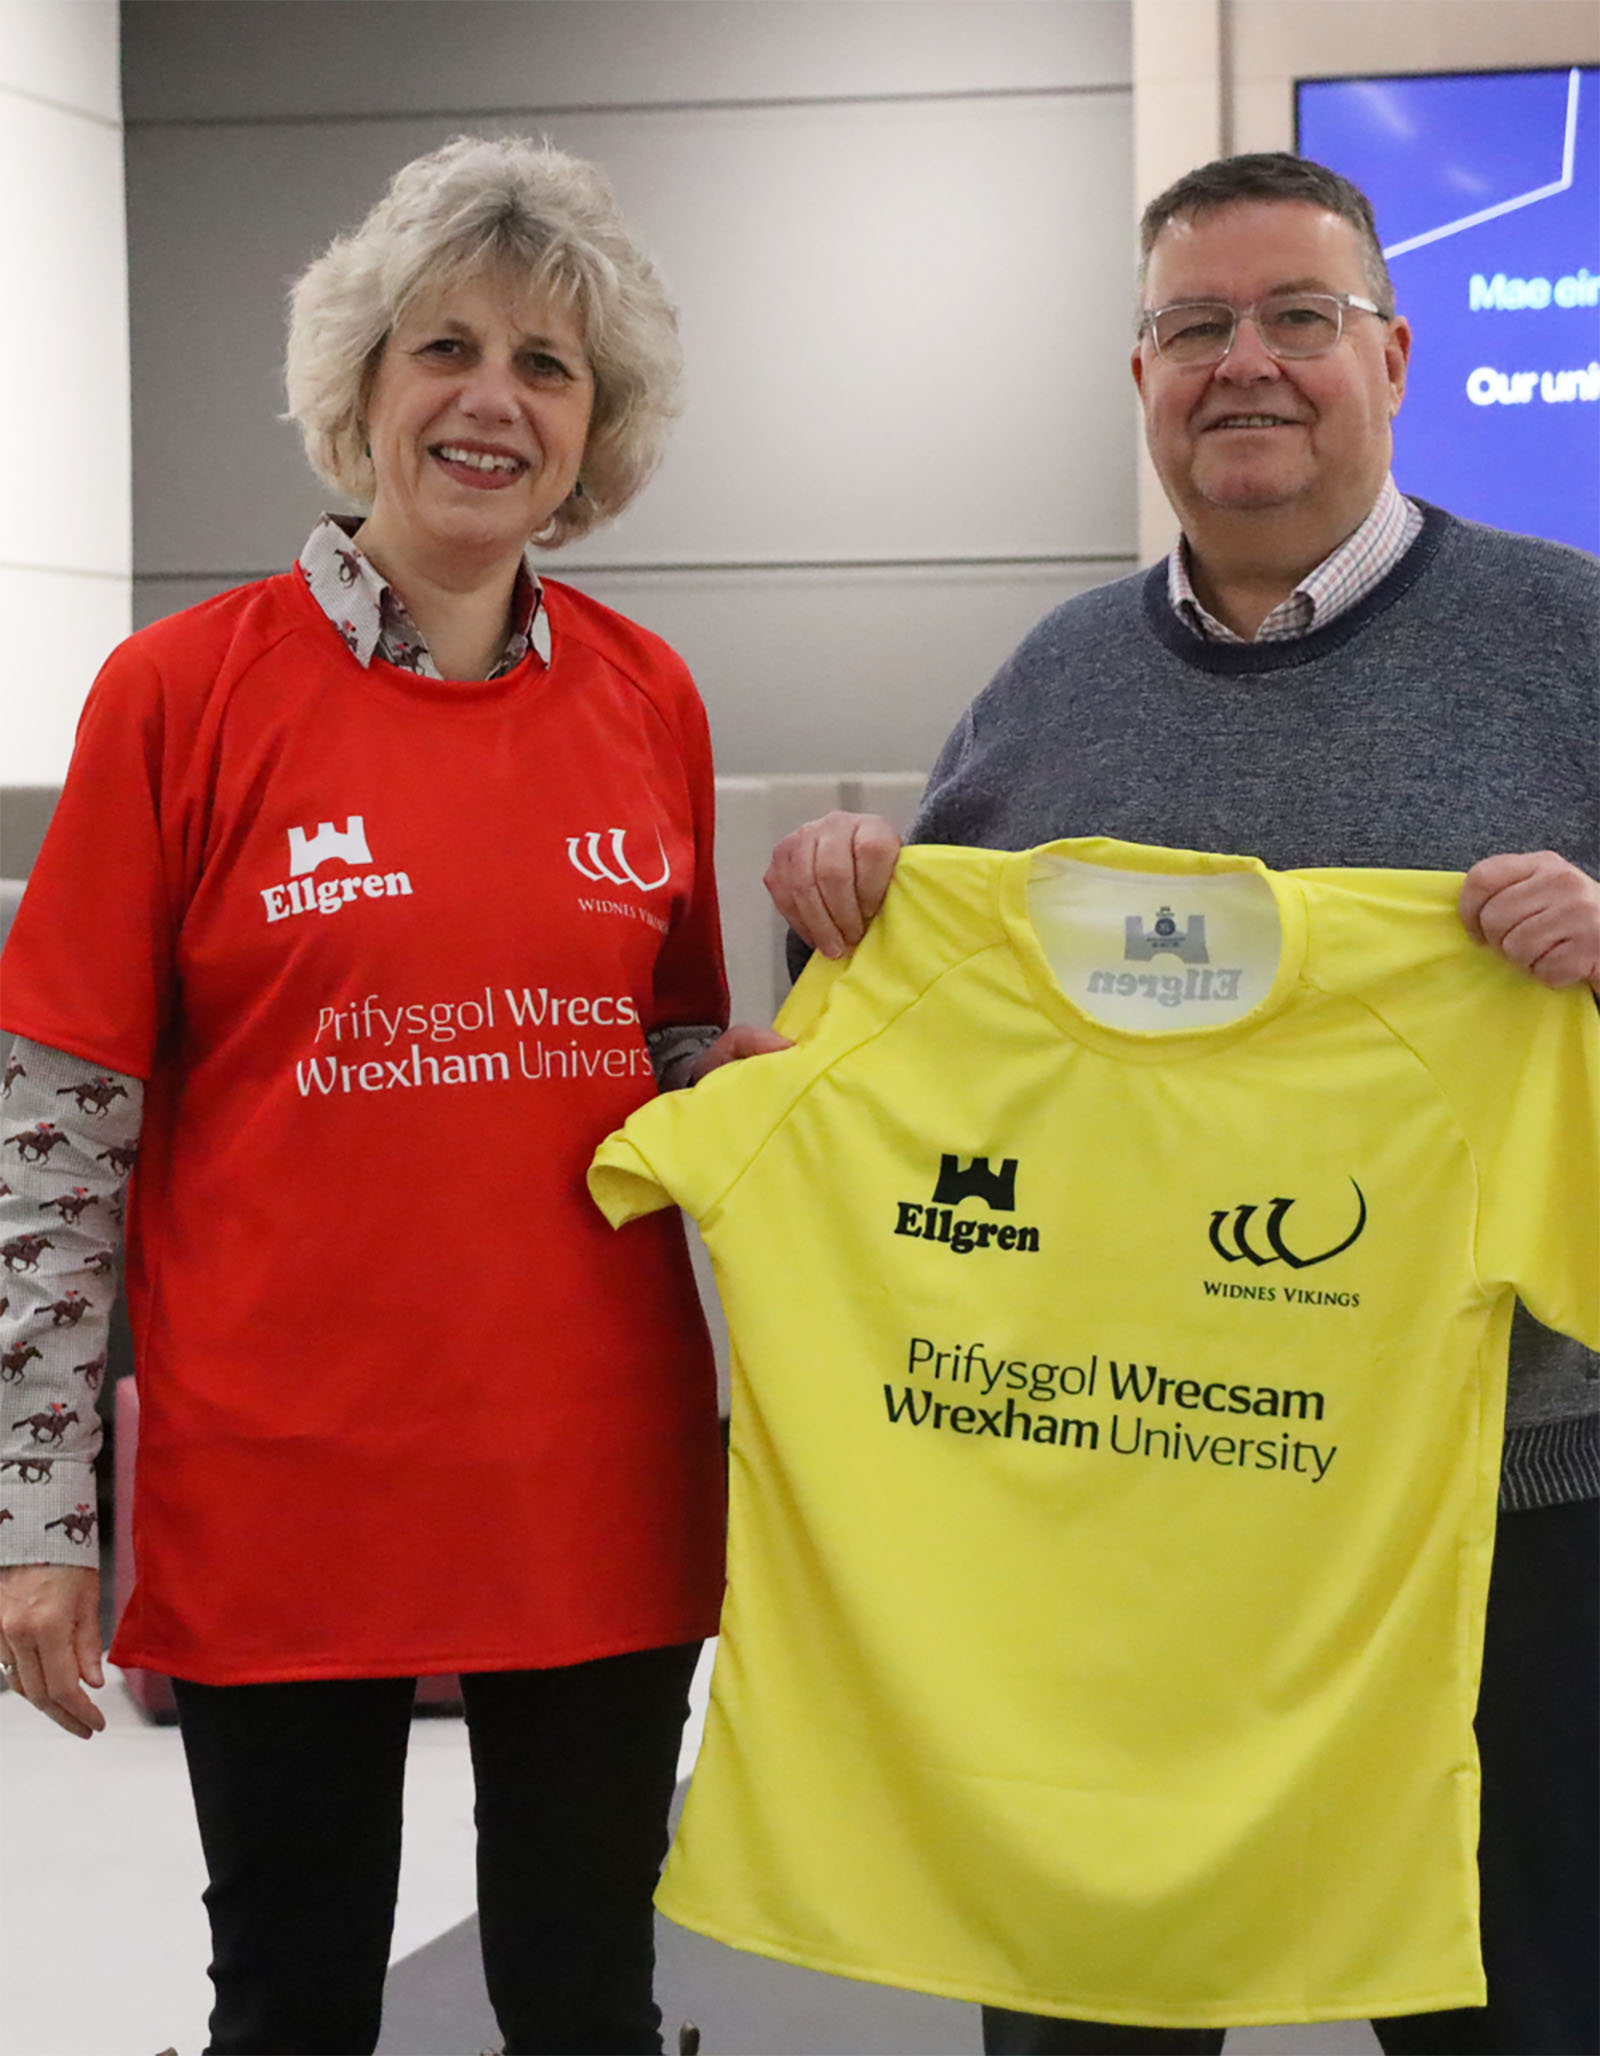 Professor Maria Hinfelaar wearing a red sports shirt and a yellow sports shirt held up next to her. Both tops have the Wrexham University logo on them